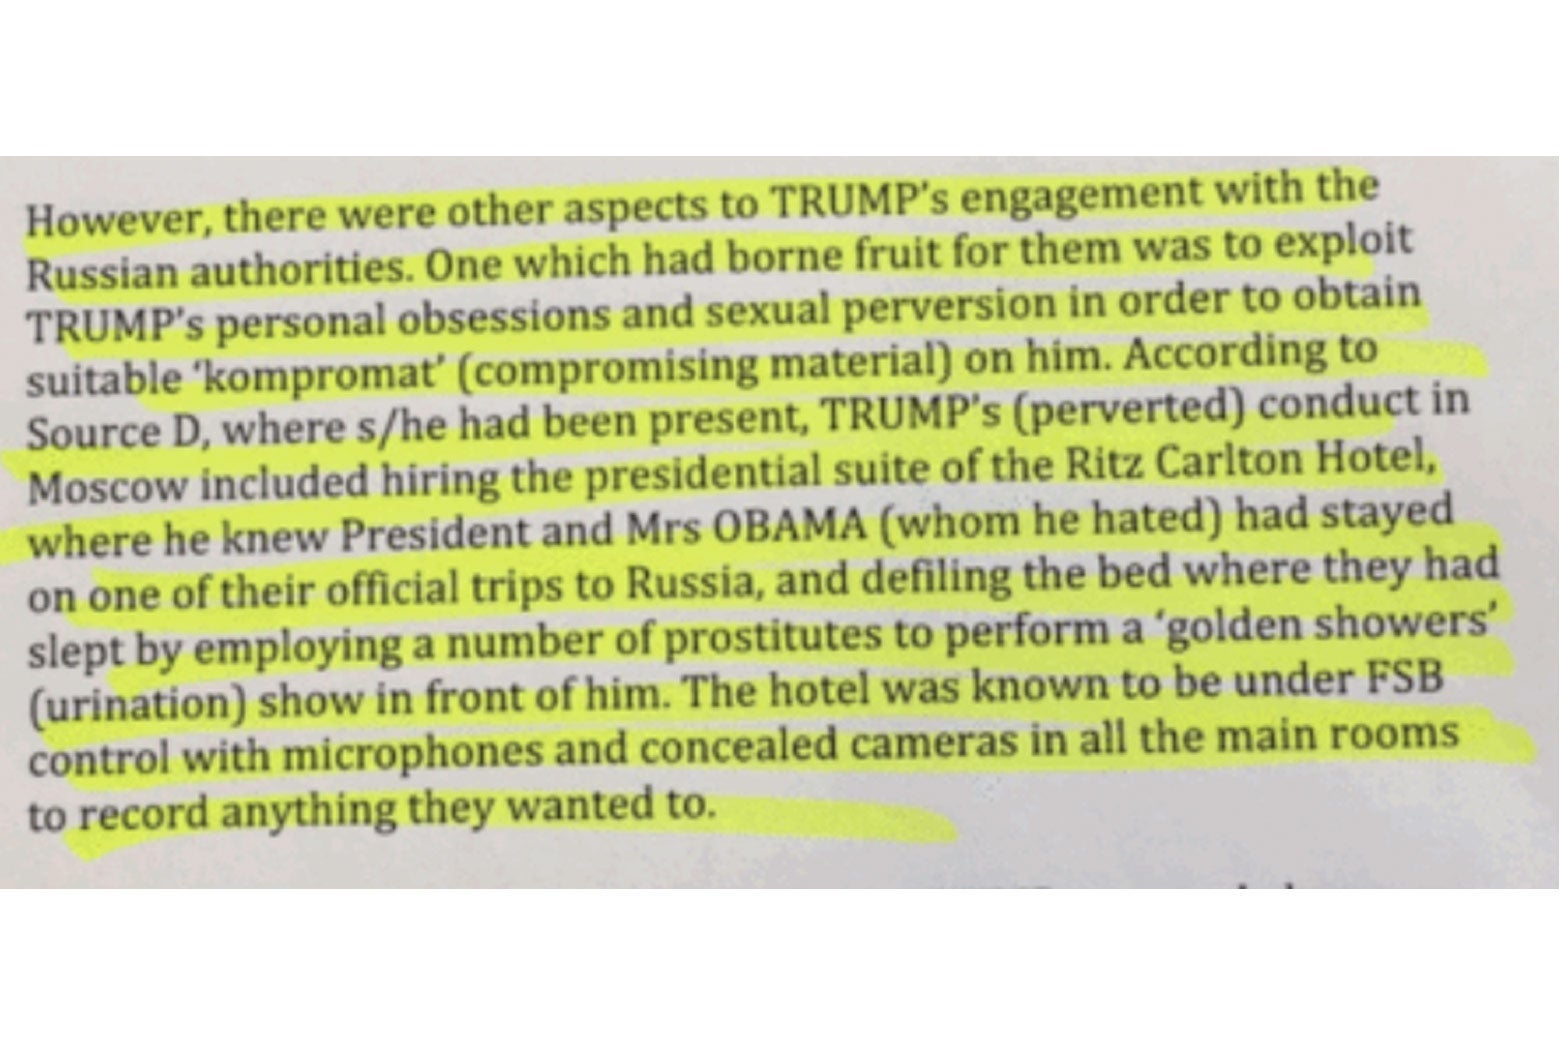 Selection from the Steele dossier about the alleged pee tape, with highlighted emphasis by Slate.